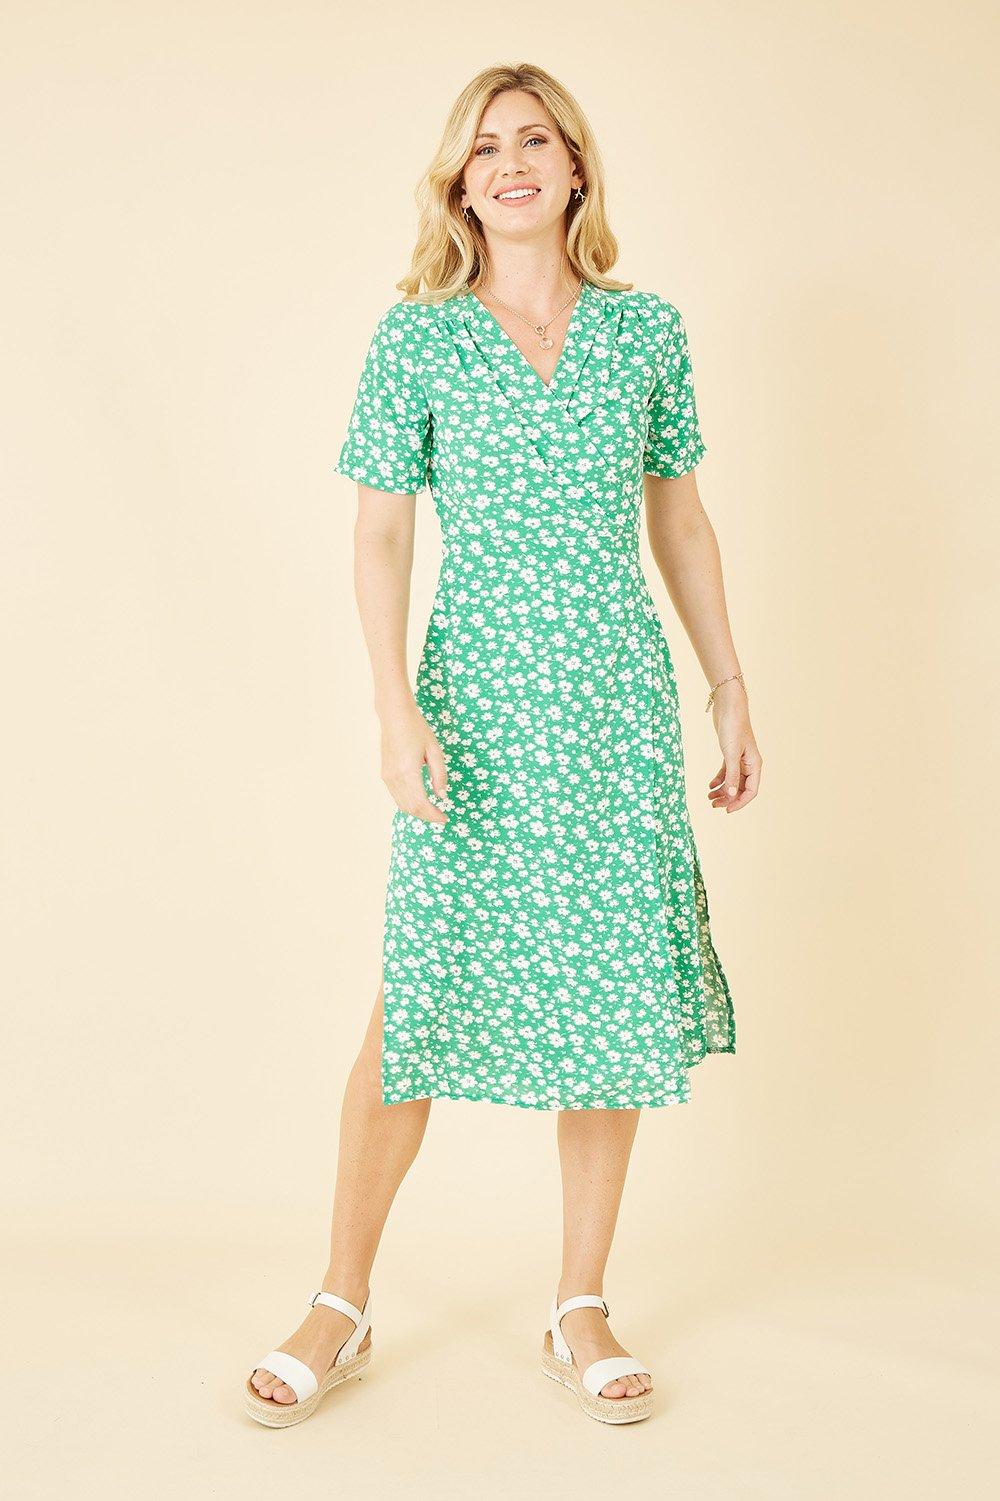 Green Ditsy Print Wrap Over Dress